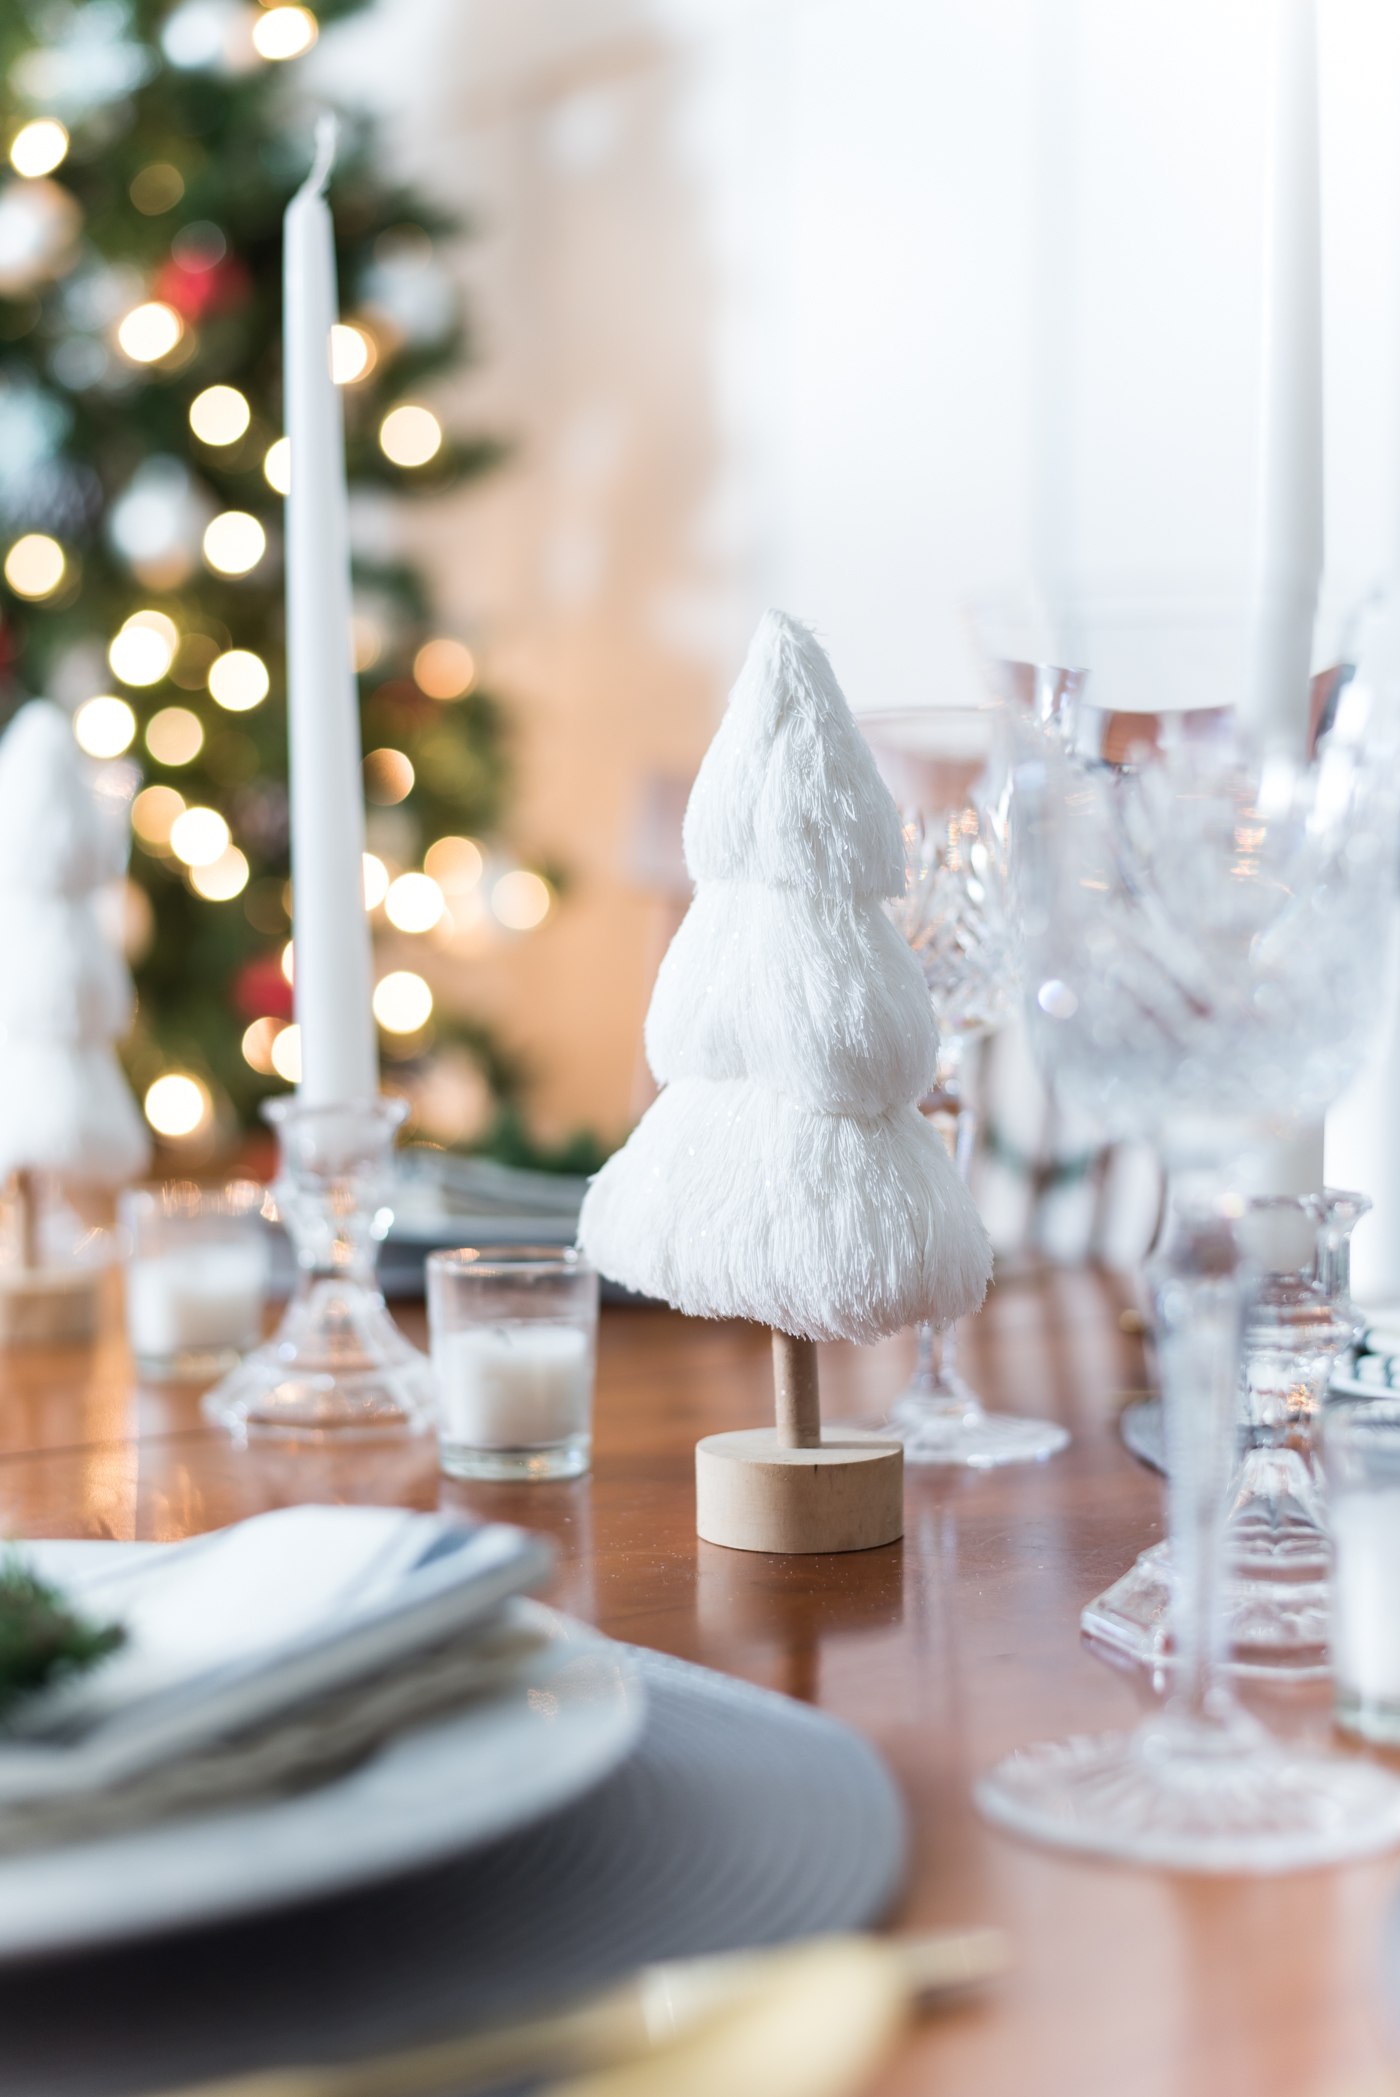 Christmas Table Setting in Gray and Whites